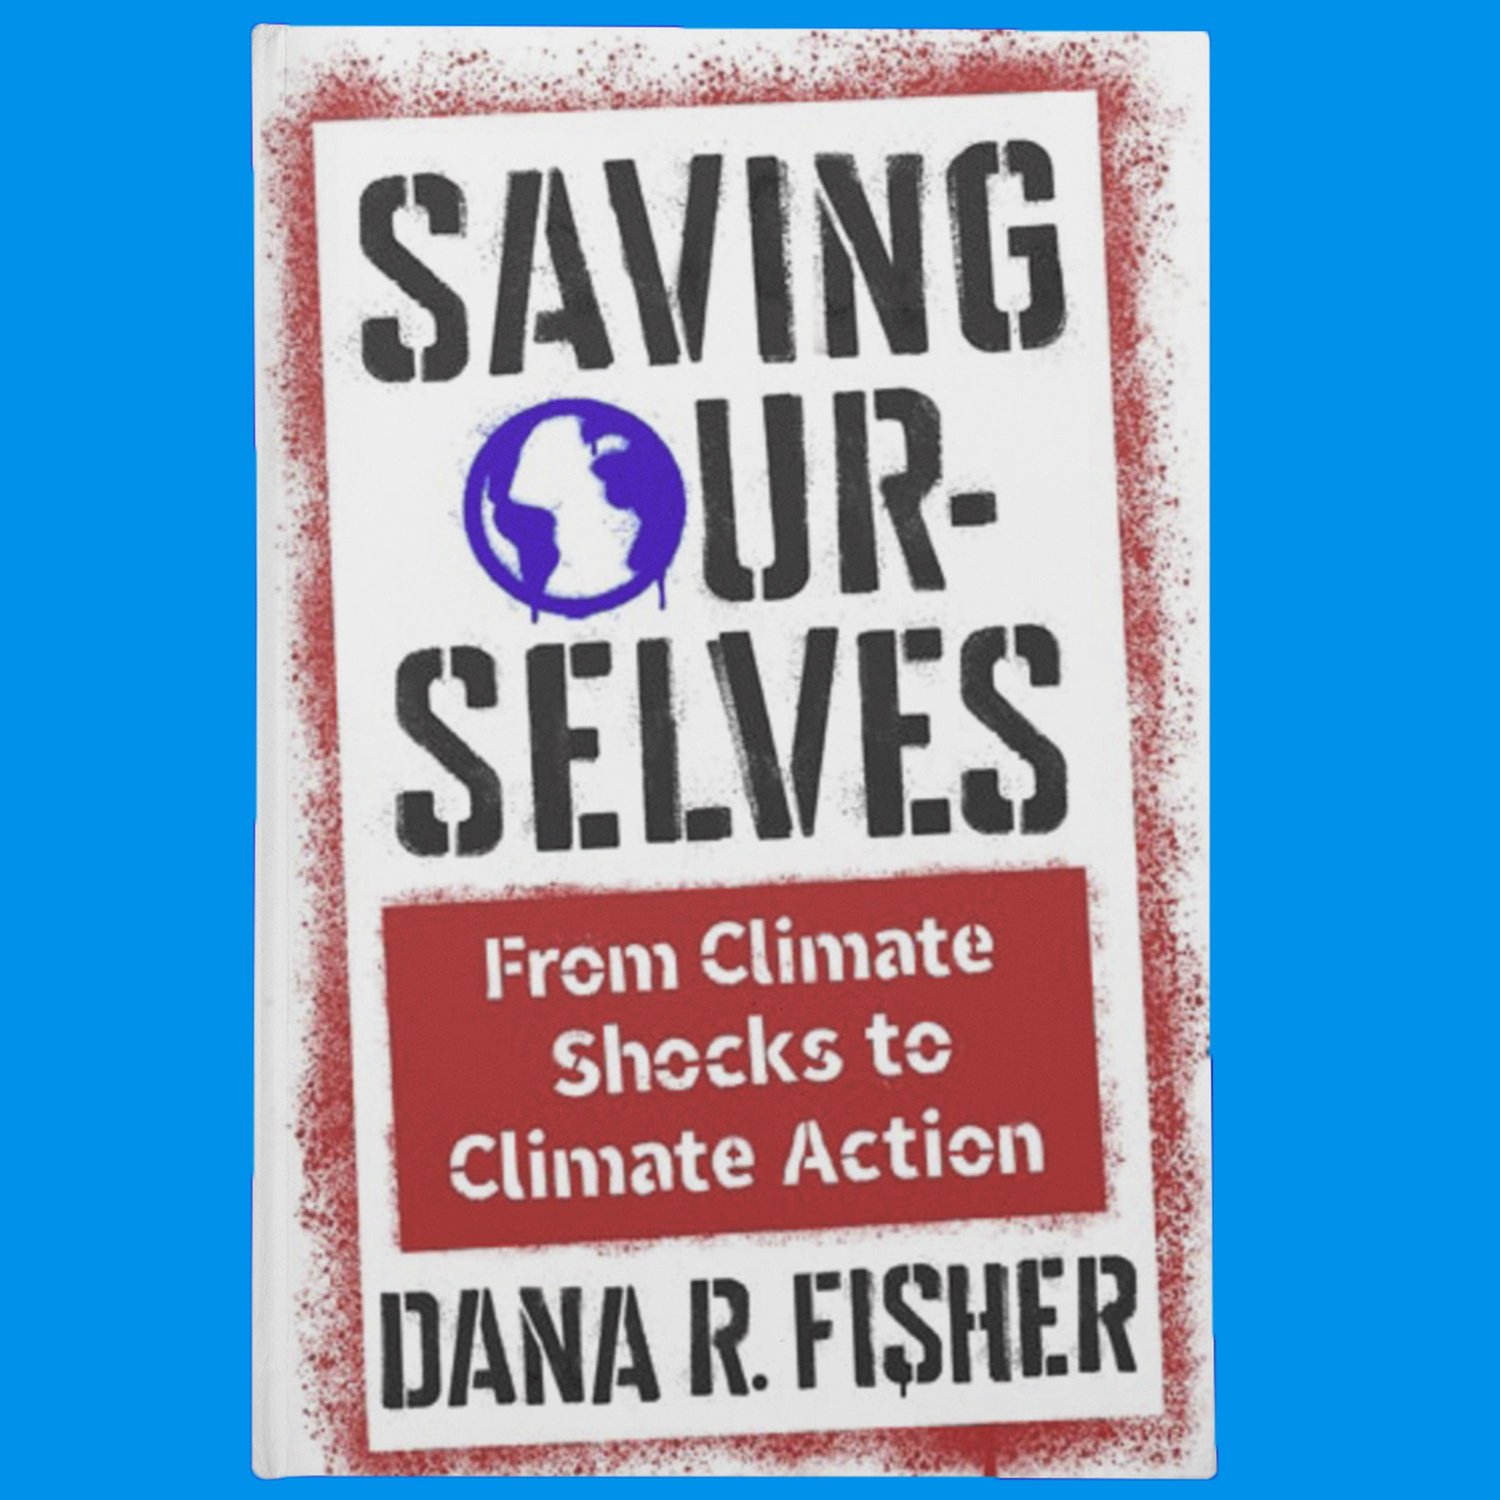 Apocalyptic Optimism: How We Can We Save Ourselves from the Climate Crisis? - Highlights - DANA FISHER